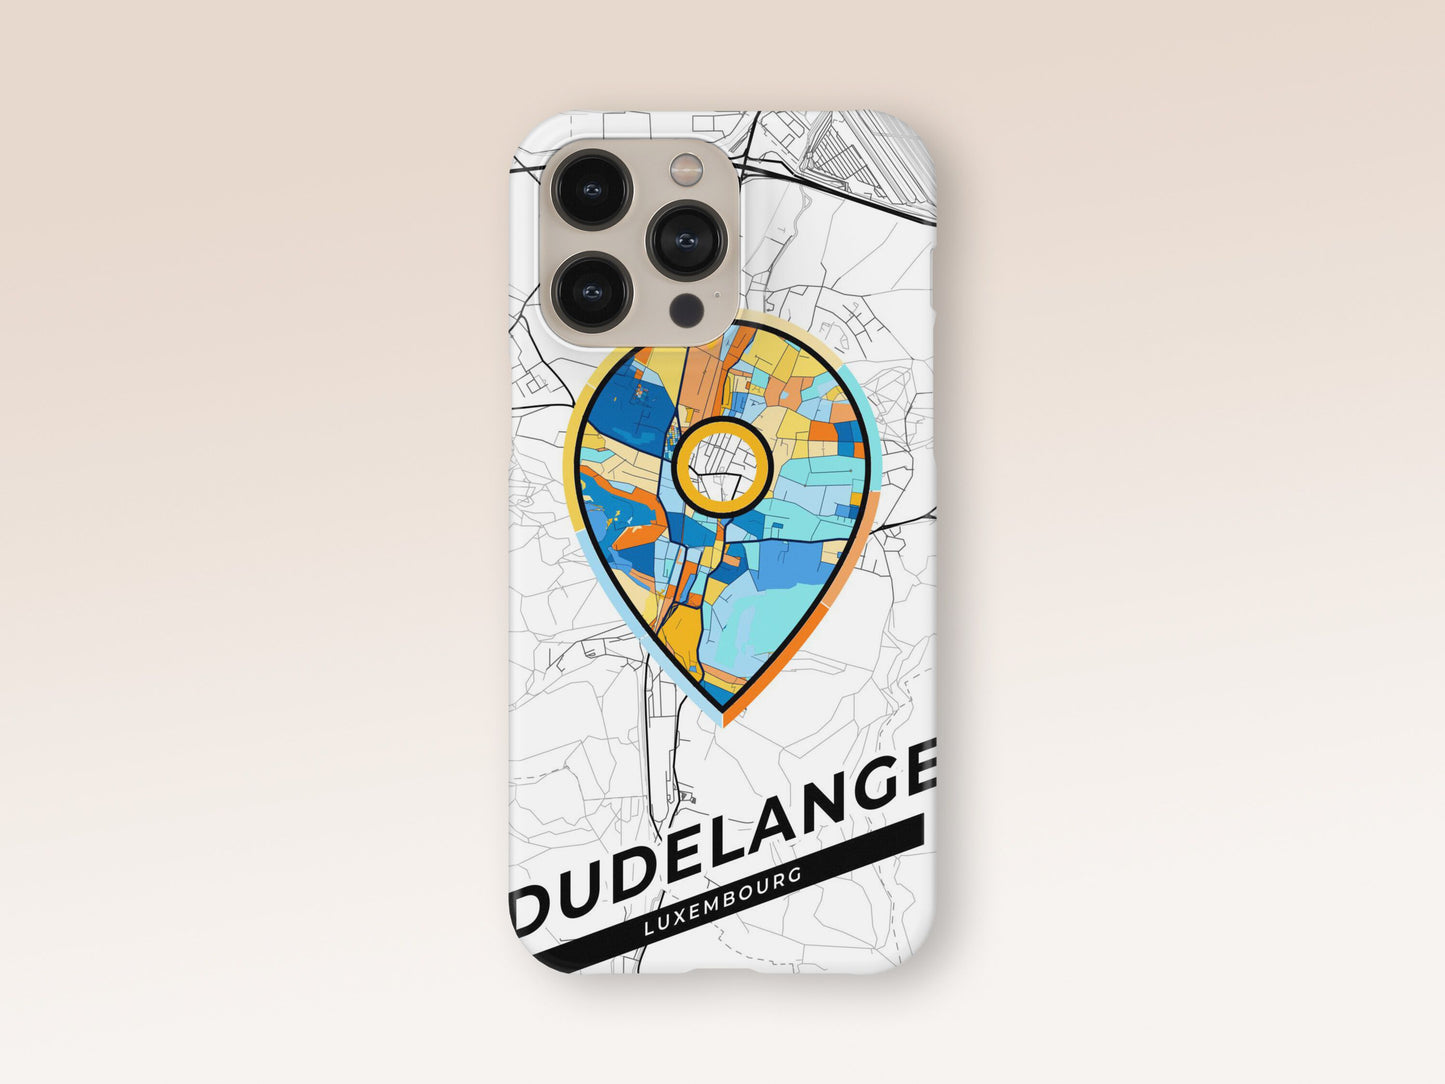 Dudelange Luxembourg slim phone case with colorful icon. Birthday, wedding or housewarming gift. Couple match cases. 1